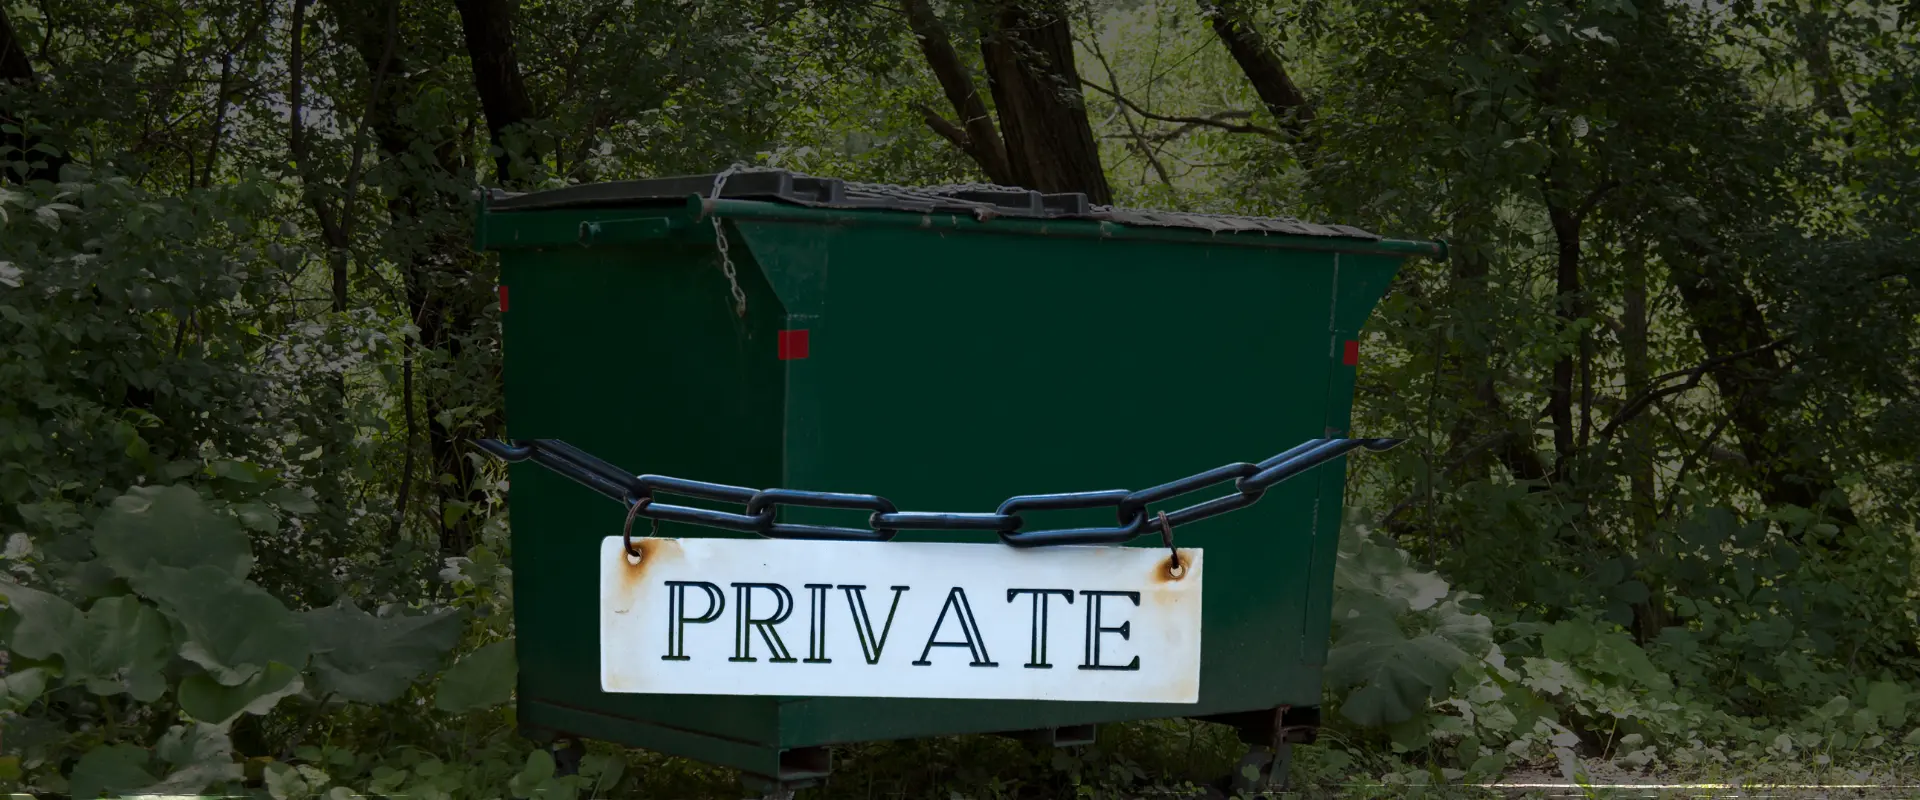 Are Dumpsters Private Property?